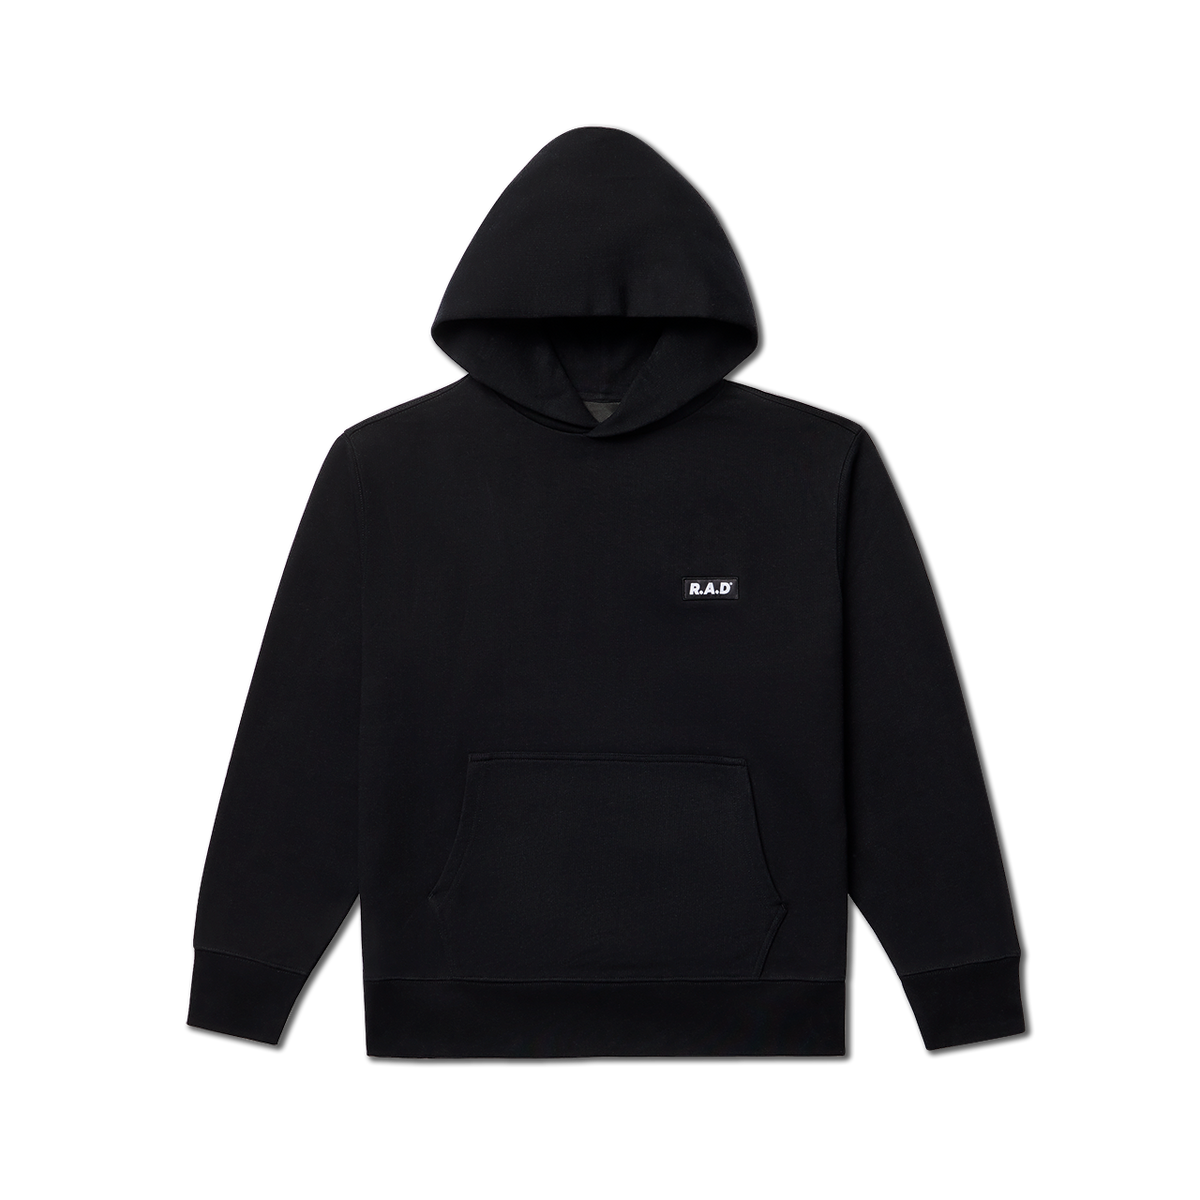 R.A.D CREW HOODED SWEAT OFF BLACK